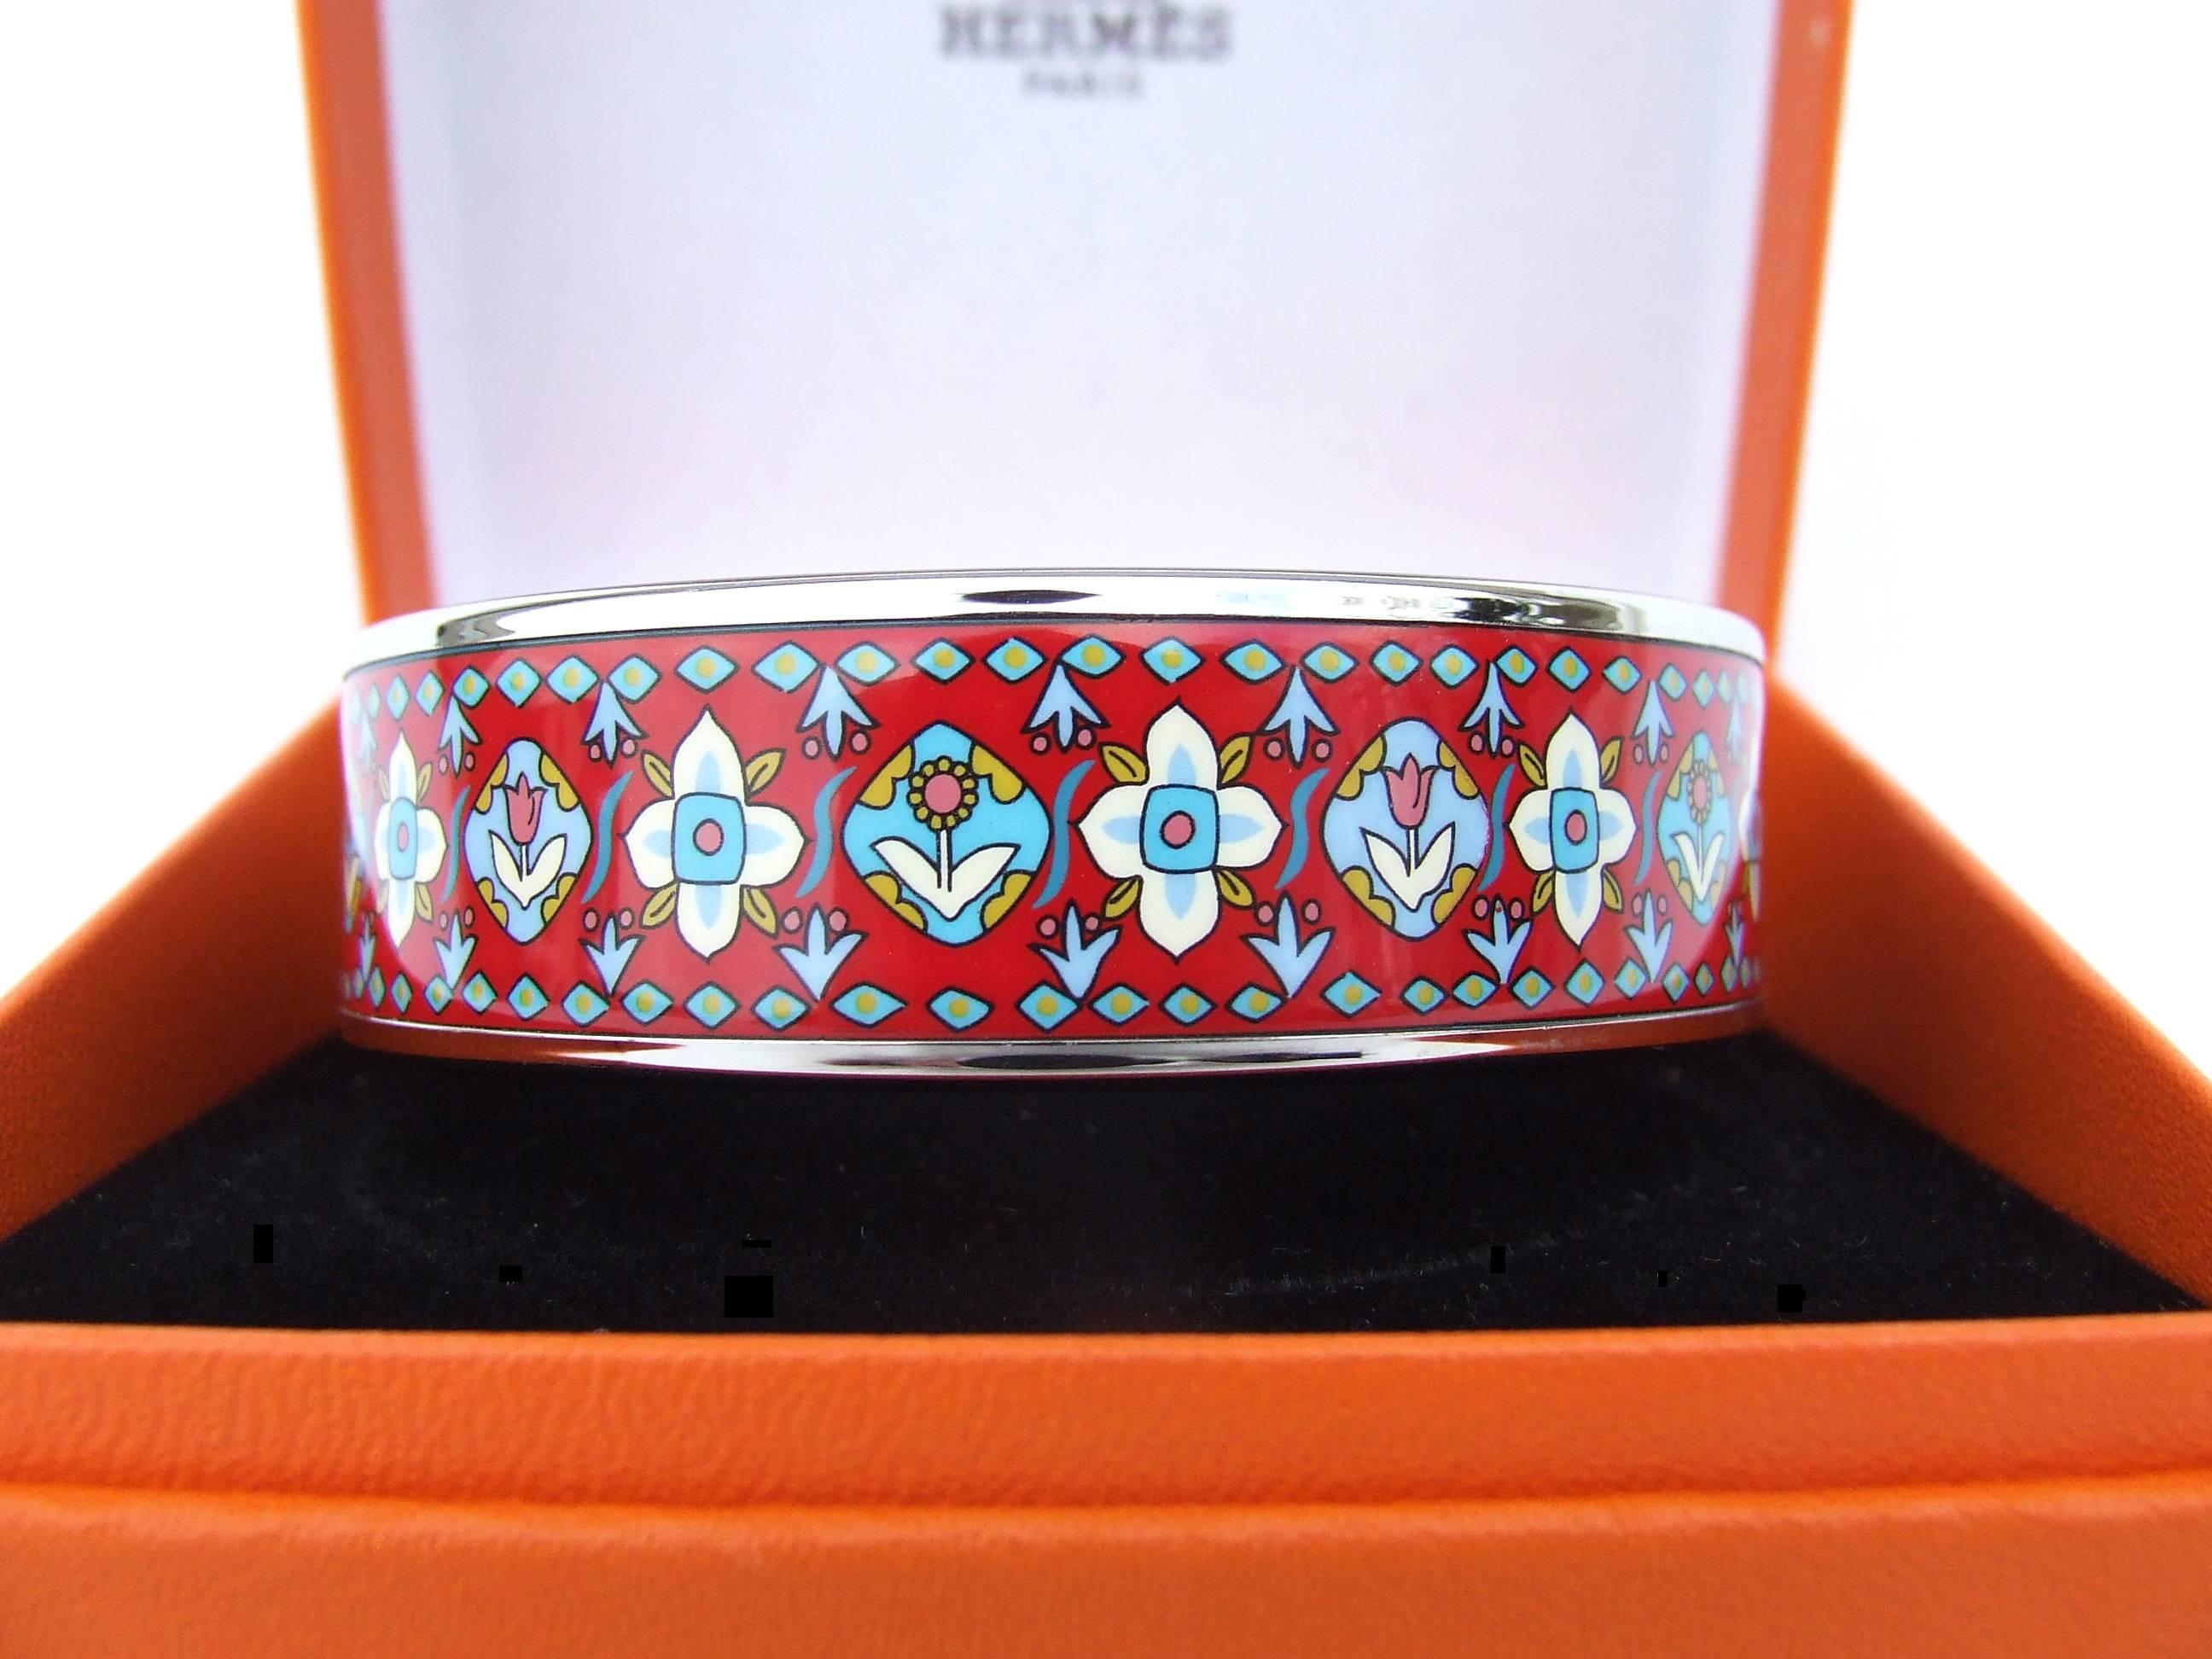 Beautiful Authentic Hermes Bracelet

Pattern: Flowers 

Made in Austria + H

Made of printed Enamel and Palladium Plated Hardware

Colorways: Red Background, Blue and White Flowers, Silver-tone rims

